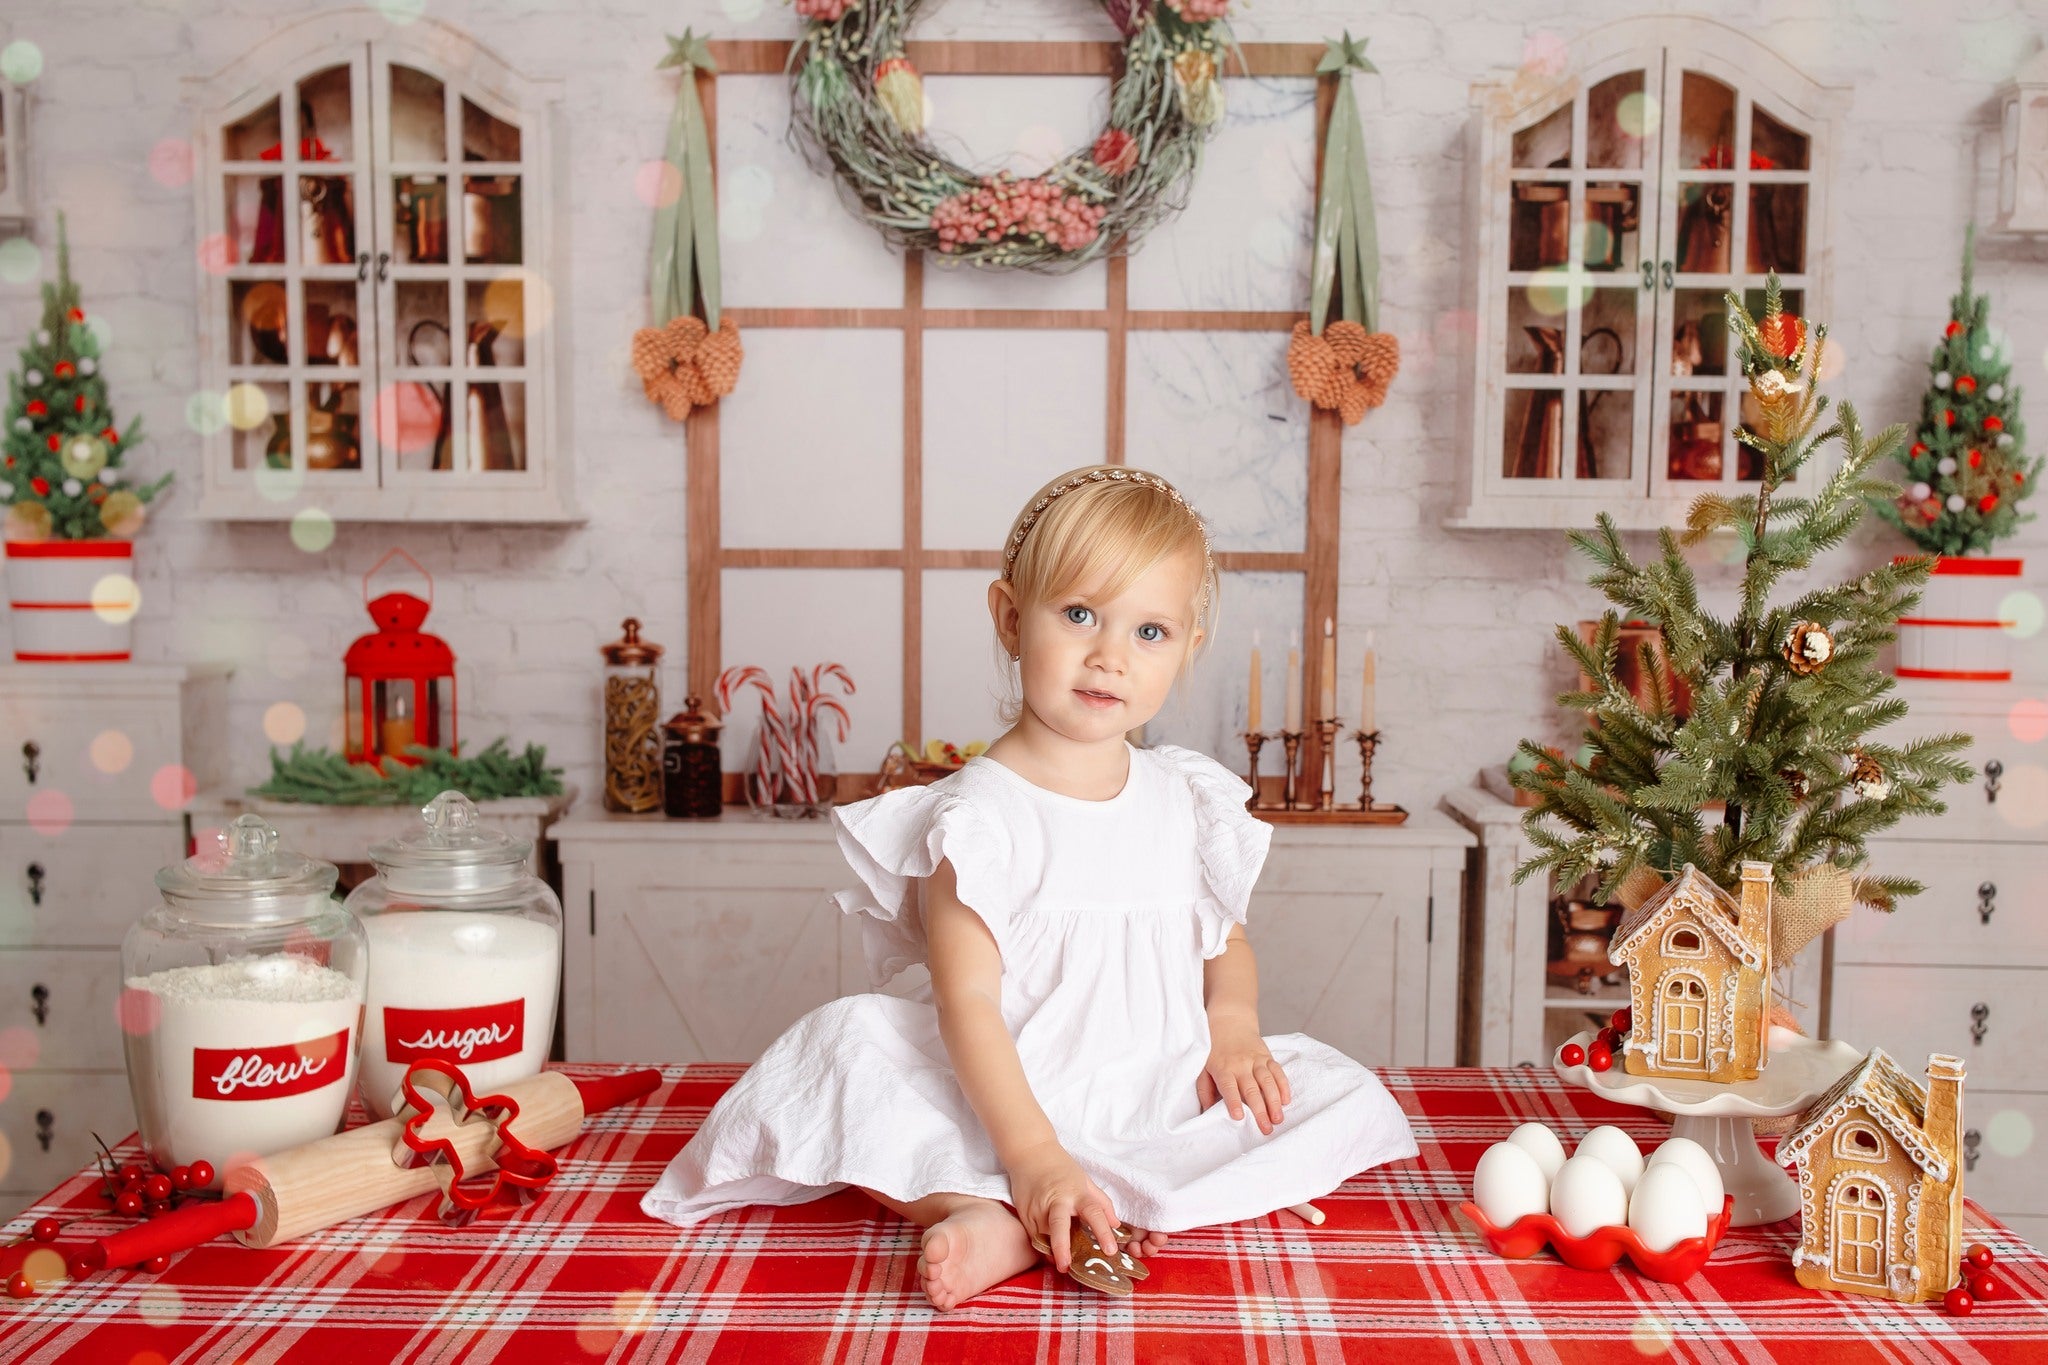 Kate Christmas White Cupboard Backdrop for Photography